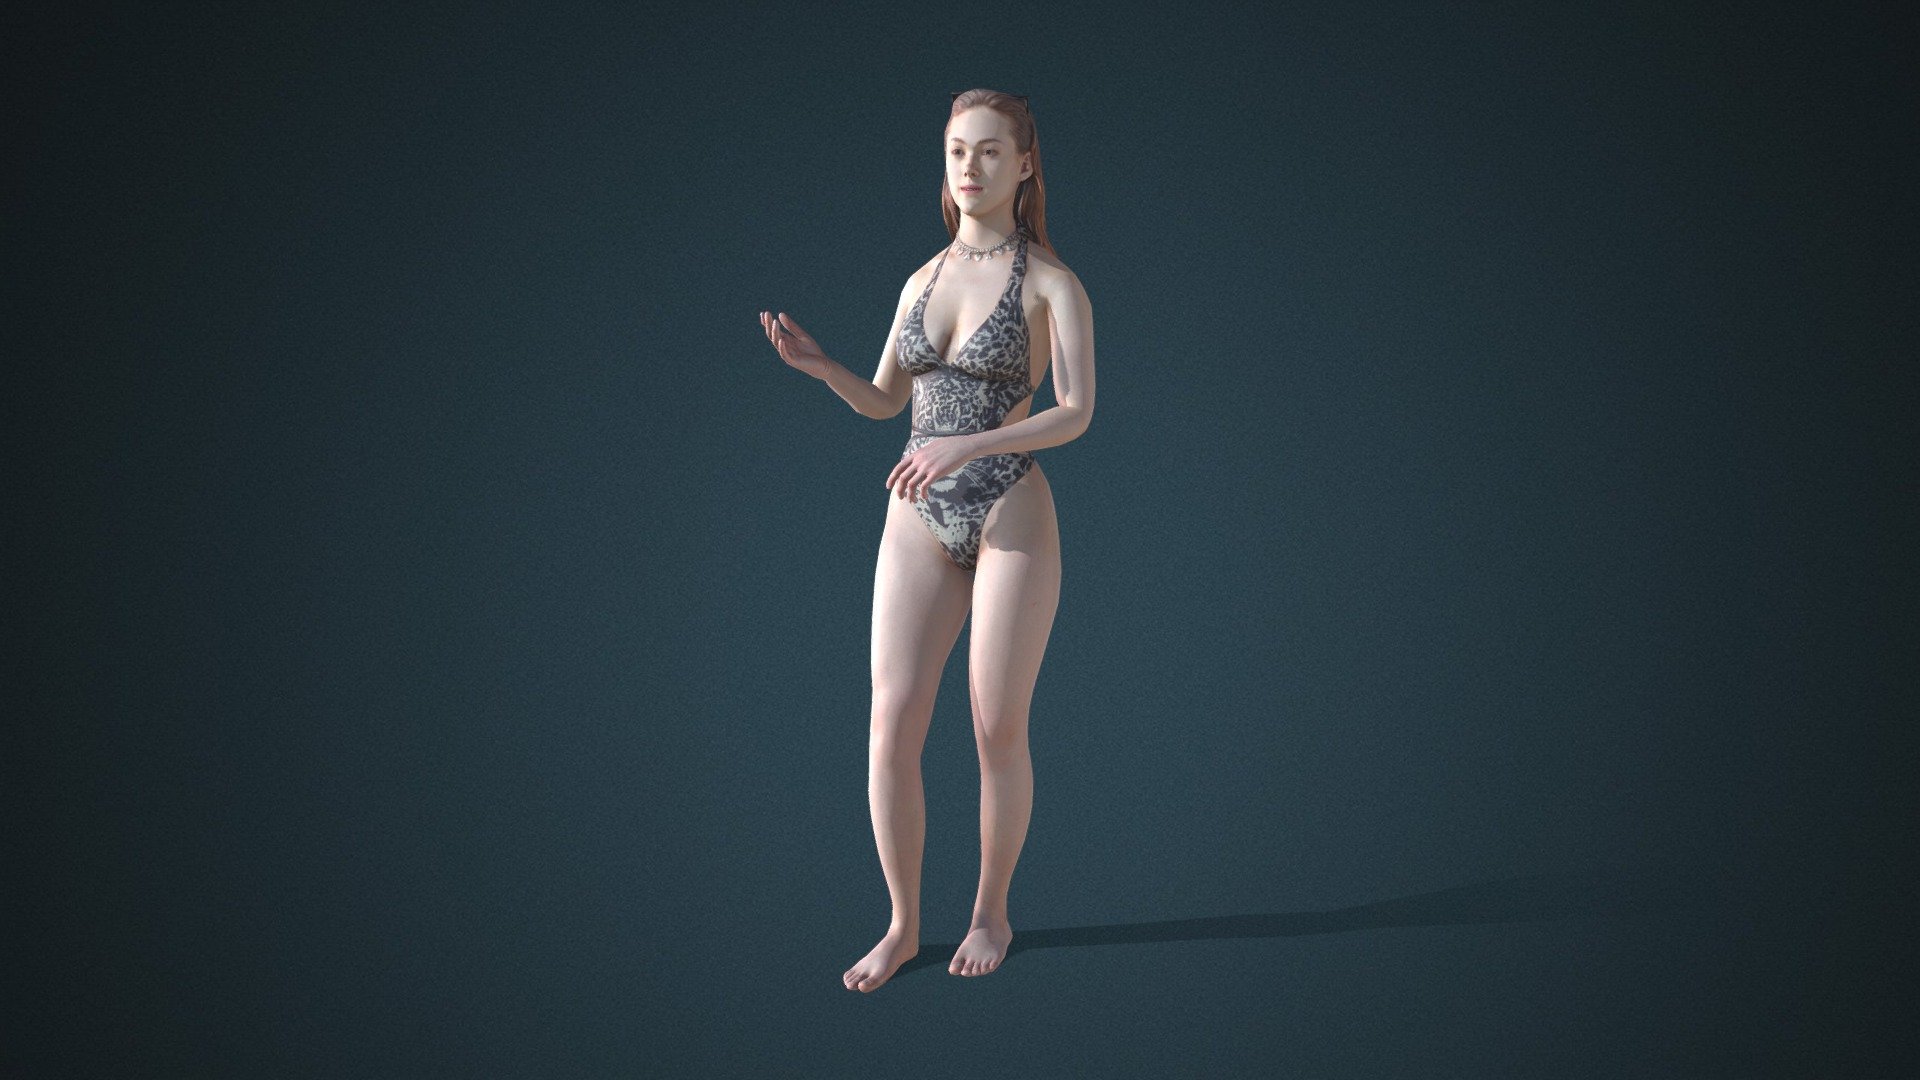 Do you like this model?  Free Download more models, motions and auto rigging tool AccuRIG (Value: $150+) on ActorCore
 

This model includes 2 mocap animations: Female__Talk, Female_Walk. Get more free motions

Design for high-performance crowd animation.

Buy full pack and Save 20%+: Beachwear Vol.2


SPECIFICATIONS

✔ Geometry : 7K~10K Quads, one mesh

✔ Material : One material with changeable colors.

✔ Texture Resolution : 4K

✔ Shader : PBR, Diffuse, Normal, Roughness, Metallic, Opacity

✔ Rigged : Facial and Body (shoulders, fingers, toes, eyeballs, jaw)

✔ Blendshape : 122 for facial expressions and lipsync

✔ Compatible with iClone AccuLips, Facial ExPlus, and traditional lip-sync.


About Reallusion ActorCore

ActorCore offers the highest quality 3D asset libraries for mocap motions and animated 3D humans for crowd rendering 3d model